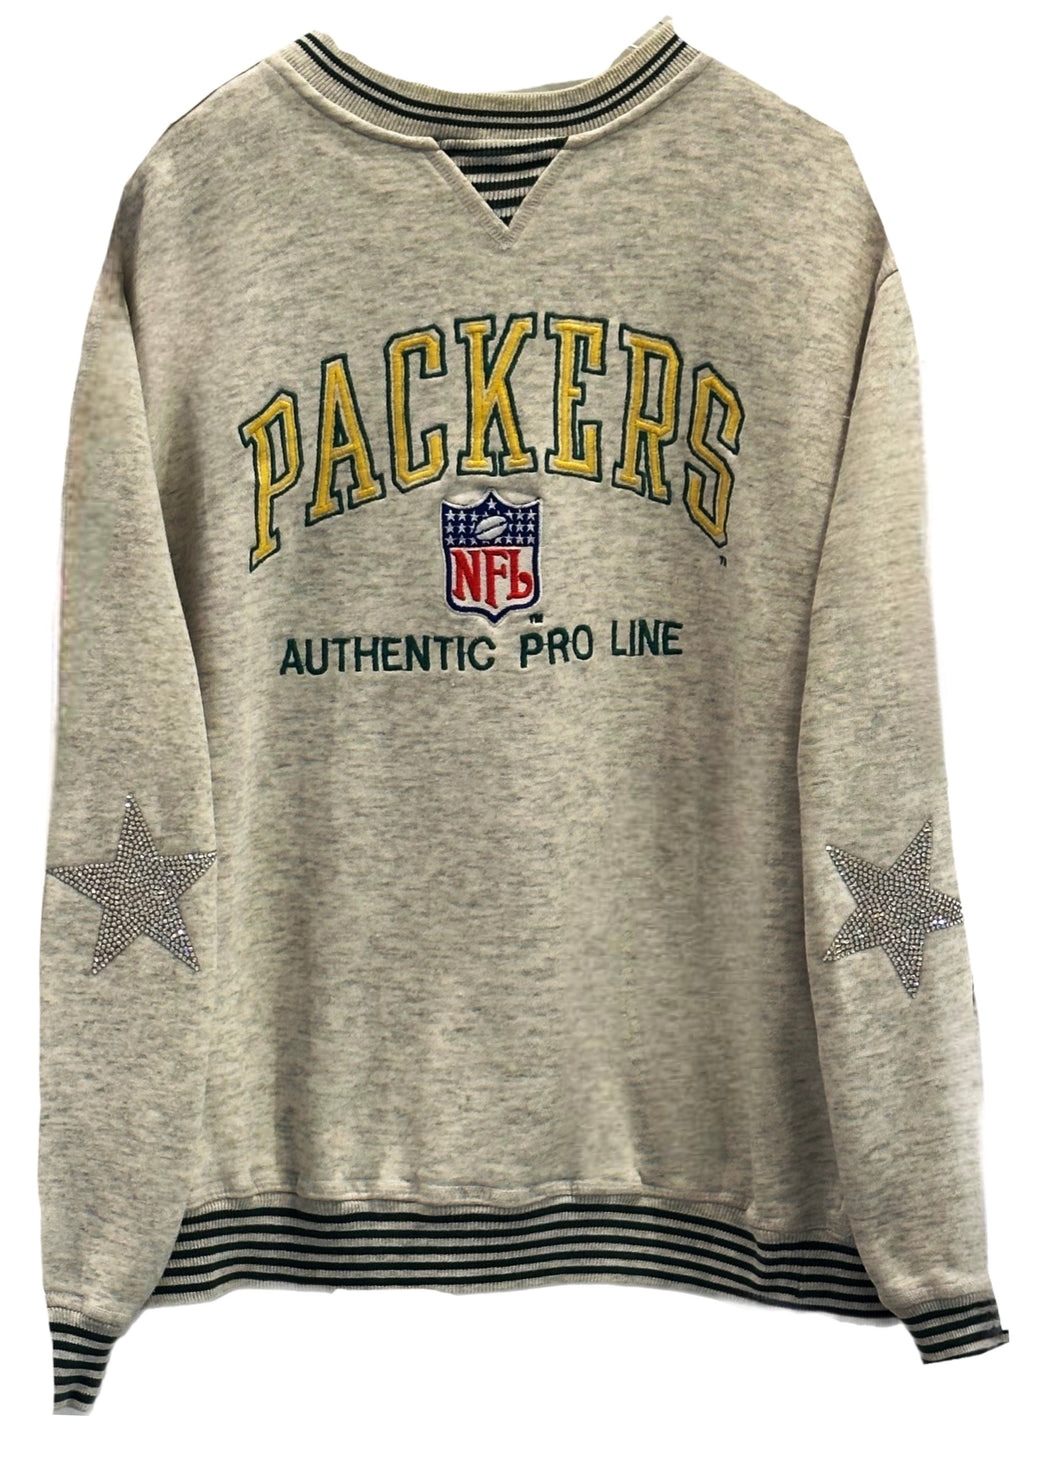 Green Bay Packers, NFL One of a KIND Vintage Sweatshirt with Scattered Three Crystal Star Design